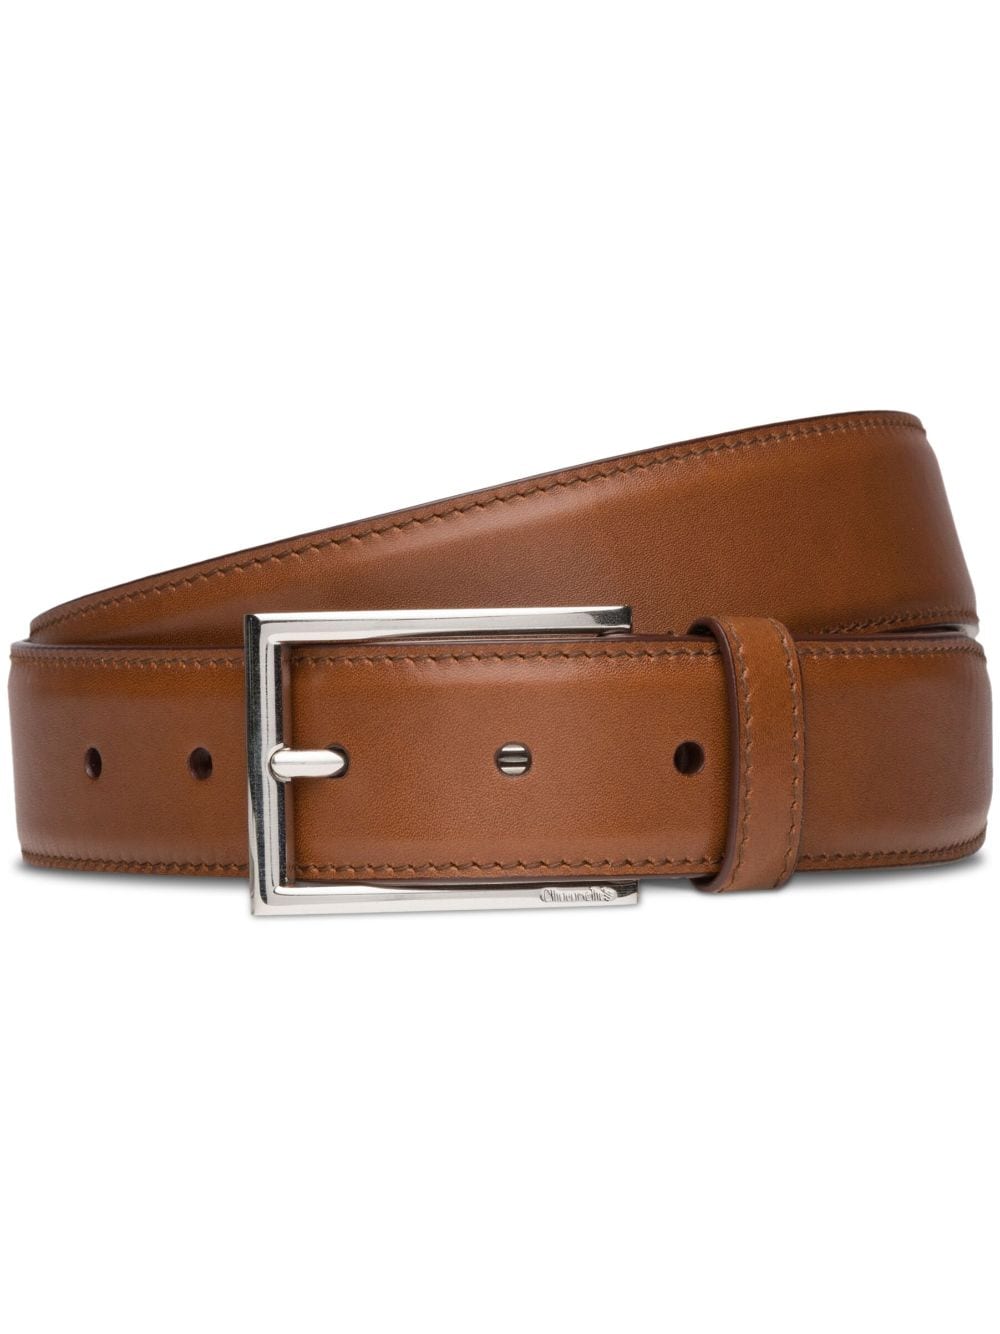 Church's Nevada Leather Belt In Brown